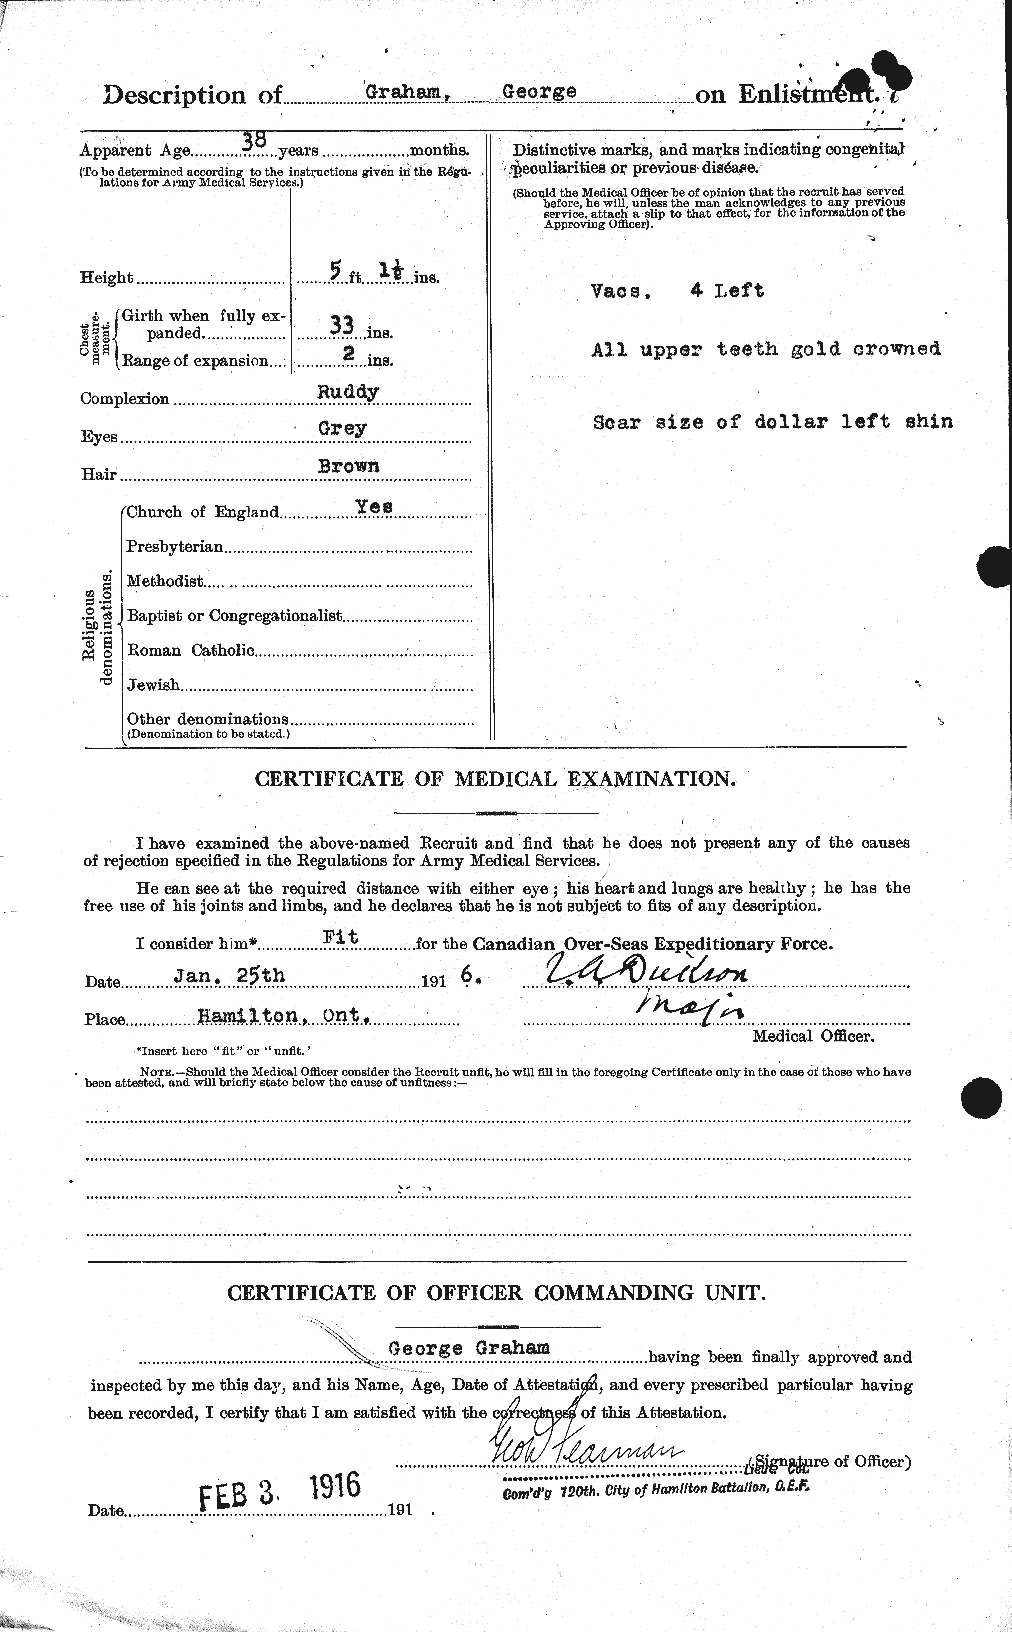 Personnel Records of the First World War - CEF 357625b